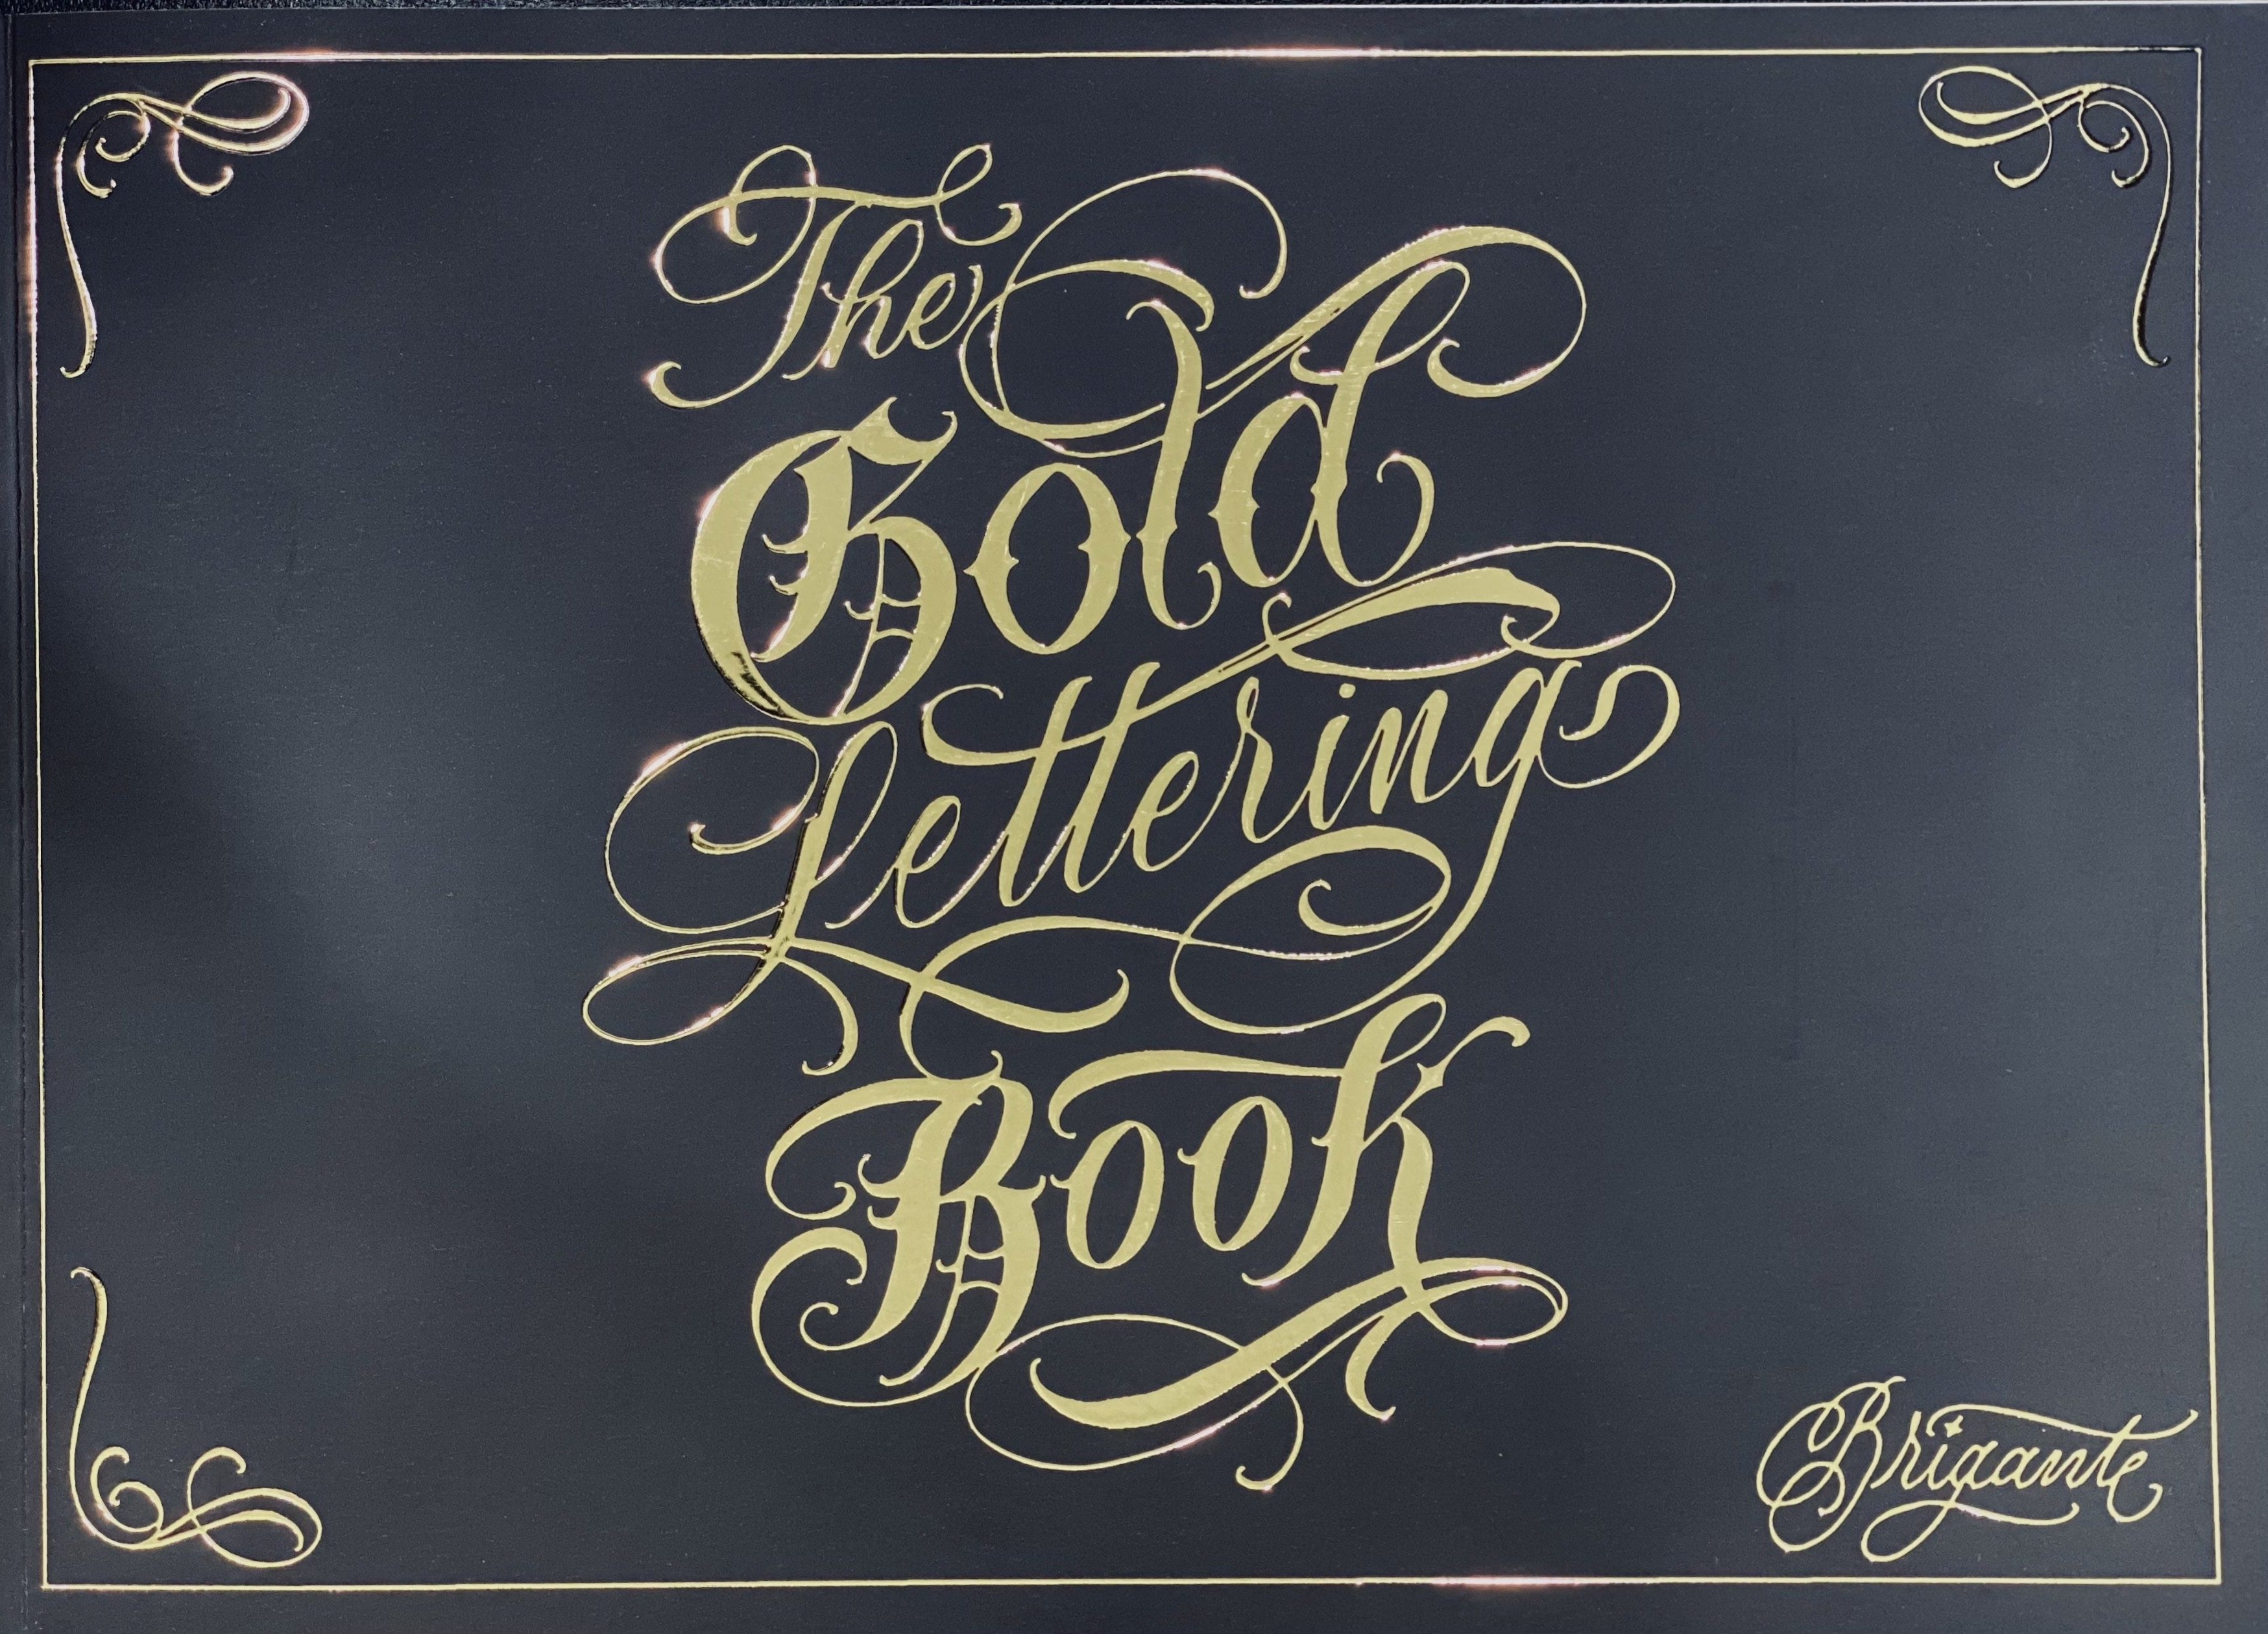 The Gold Lettering Book